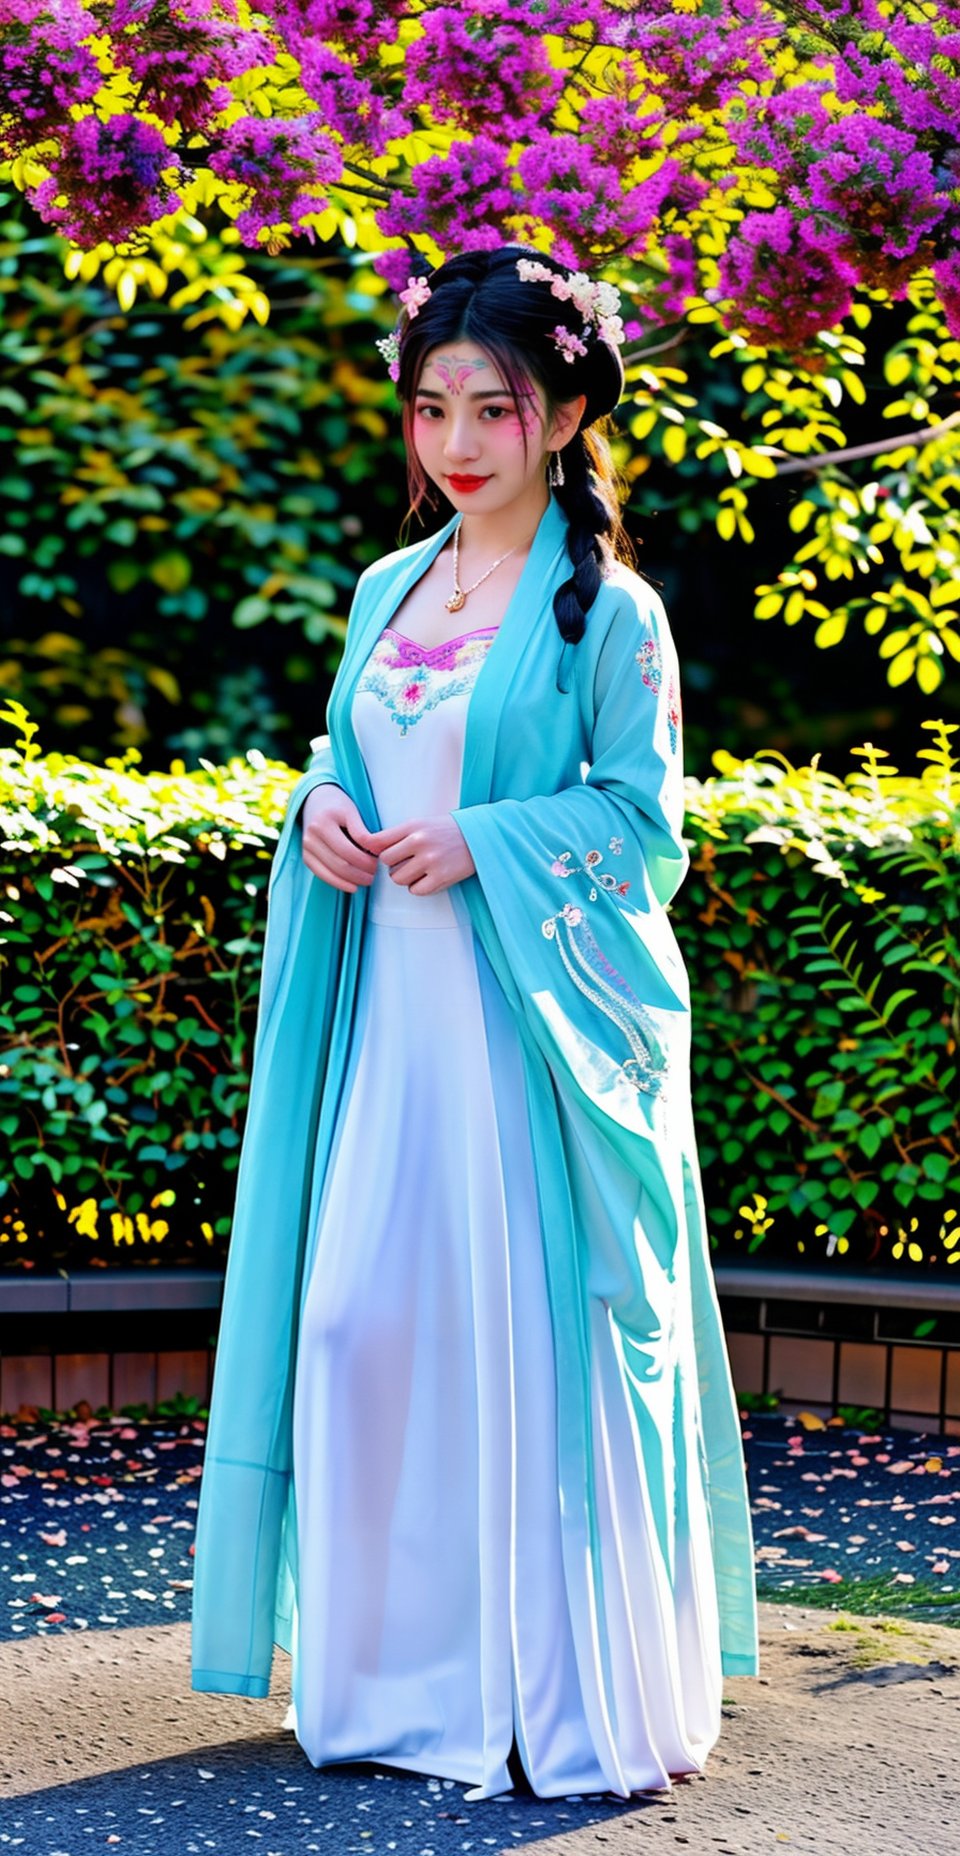 (full body:1.4),(from front:1.2),photo of (a 18 year-old cute Chinese woman:1.2) wearing Detailed embroidered (see-through) (Hanfu:1.2) from r/nakedhanfu,(best aesthetic:1.2) and (best quality:1.2) and (photorealistic:1.4) and (Realistic:1.4) and Detailed Skin Textures and detailed skin pores and high skin detail,poes,see-through long sleeves and see-through wide sleeves,(standing and legs spread),<lora:naked hanfuV1:0.7>, <lora:LCM_LoRA_Weights_SD15加速器:0.7>,hair bun and single braid,(Detailed facial features),Look at the audience and Seducing the audience and smiling,makeup,red lips,(looking at viewer and facing viewer) (wearing Detailed hair ornament and Detailed beads,Detailed hair flower,wearing Detailed jewelry,earrings,necklace,(facial mark:1.2),(forehead mark:1.2),wearing chinese shoes,<lyco:film grainV3:0.4>  <lora:detail_slider_v4-增加細節:1>,<lora:增加真實感epiCRealLife:1> Park background, forest, natural light, sunlight